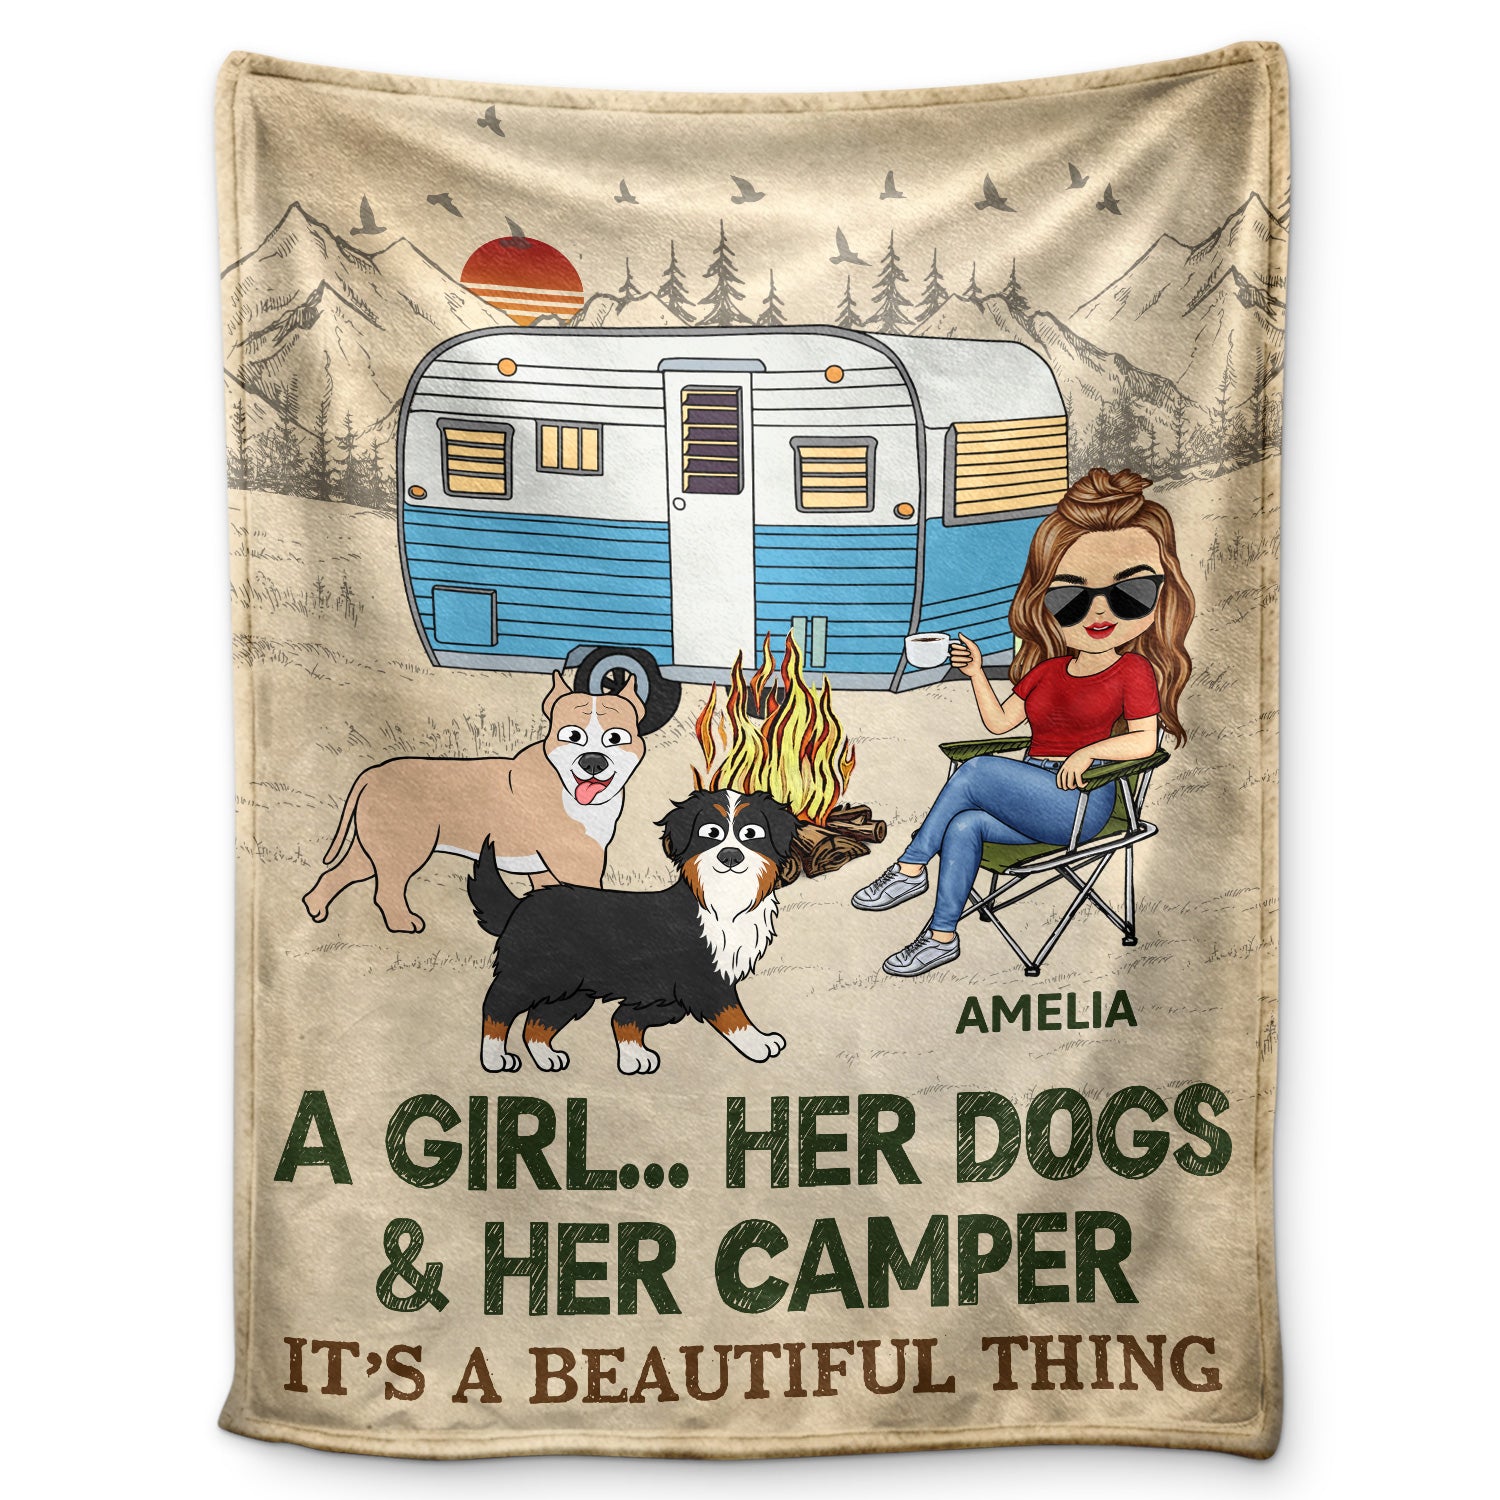 It's A Beautiful Thing Walking Dog - Camping Gift For Dog Lovers, Dog Mom, Dog Dad - Personalized Fleece Blanket, Sherpa Blanket